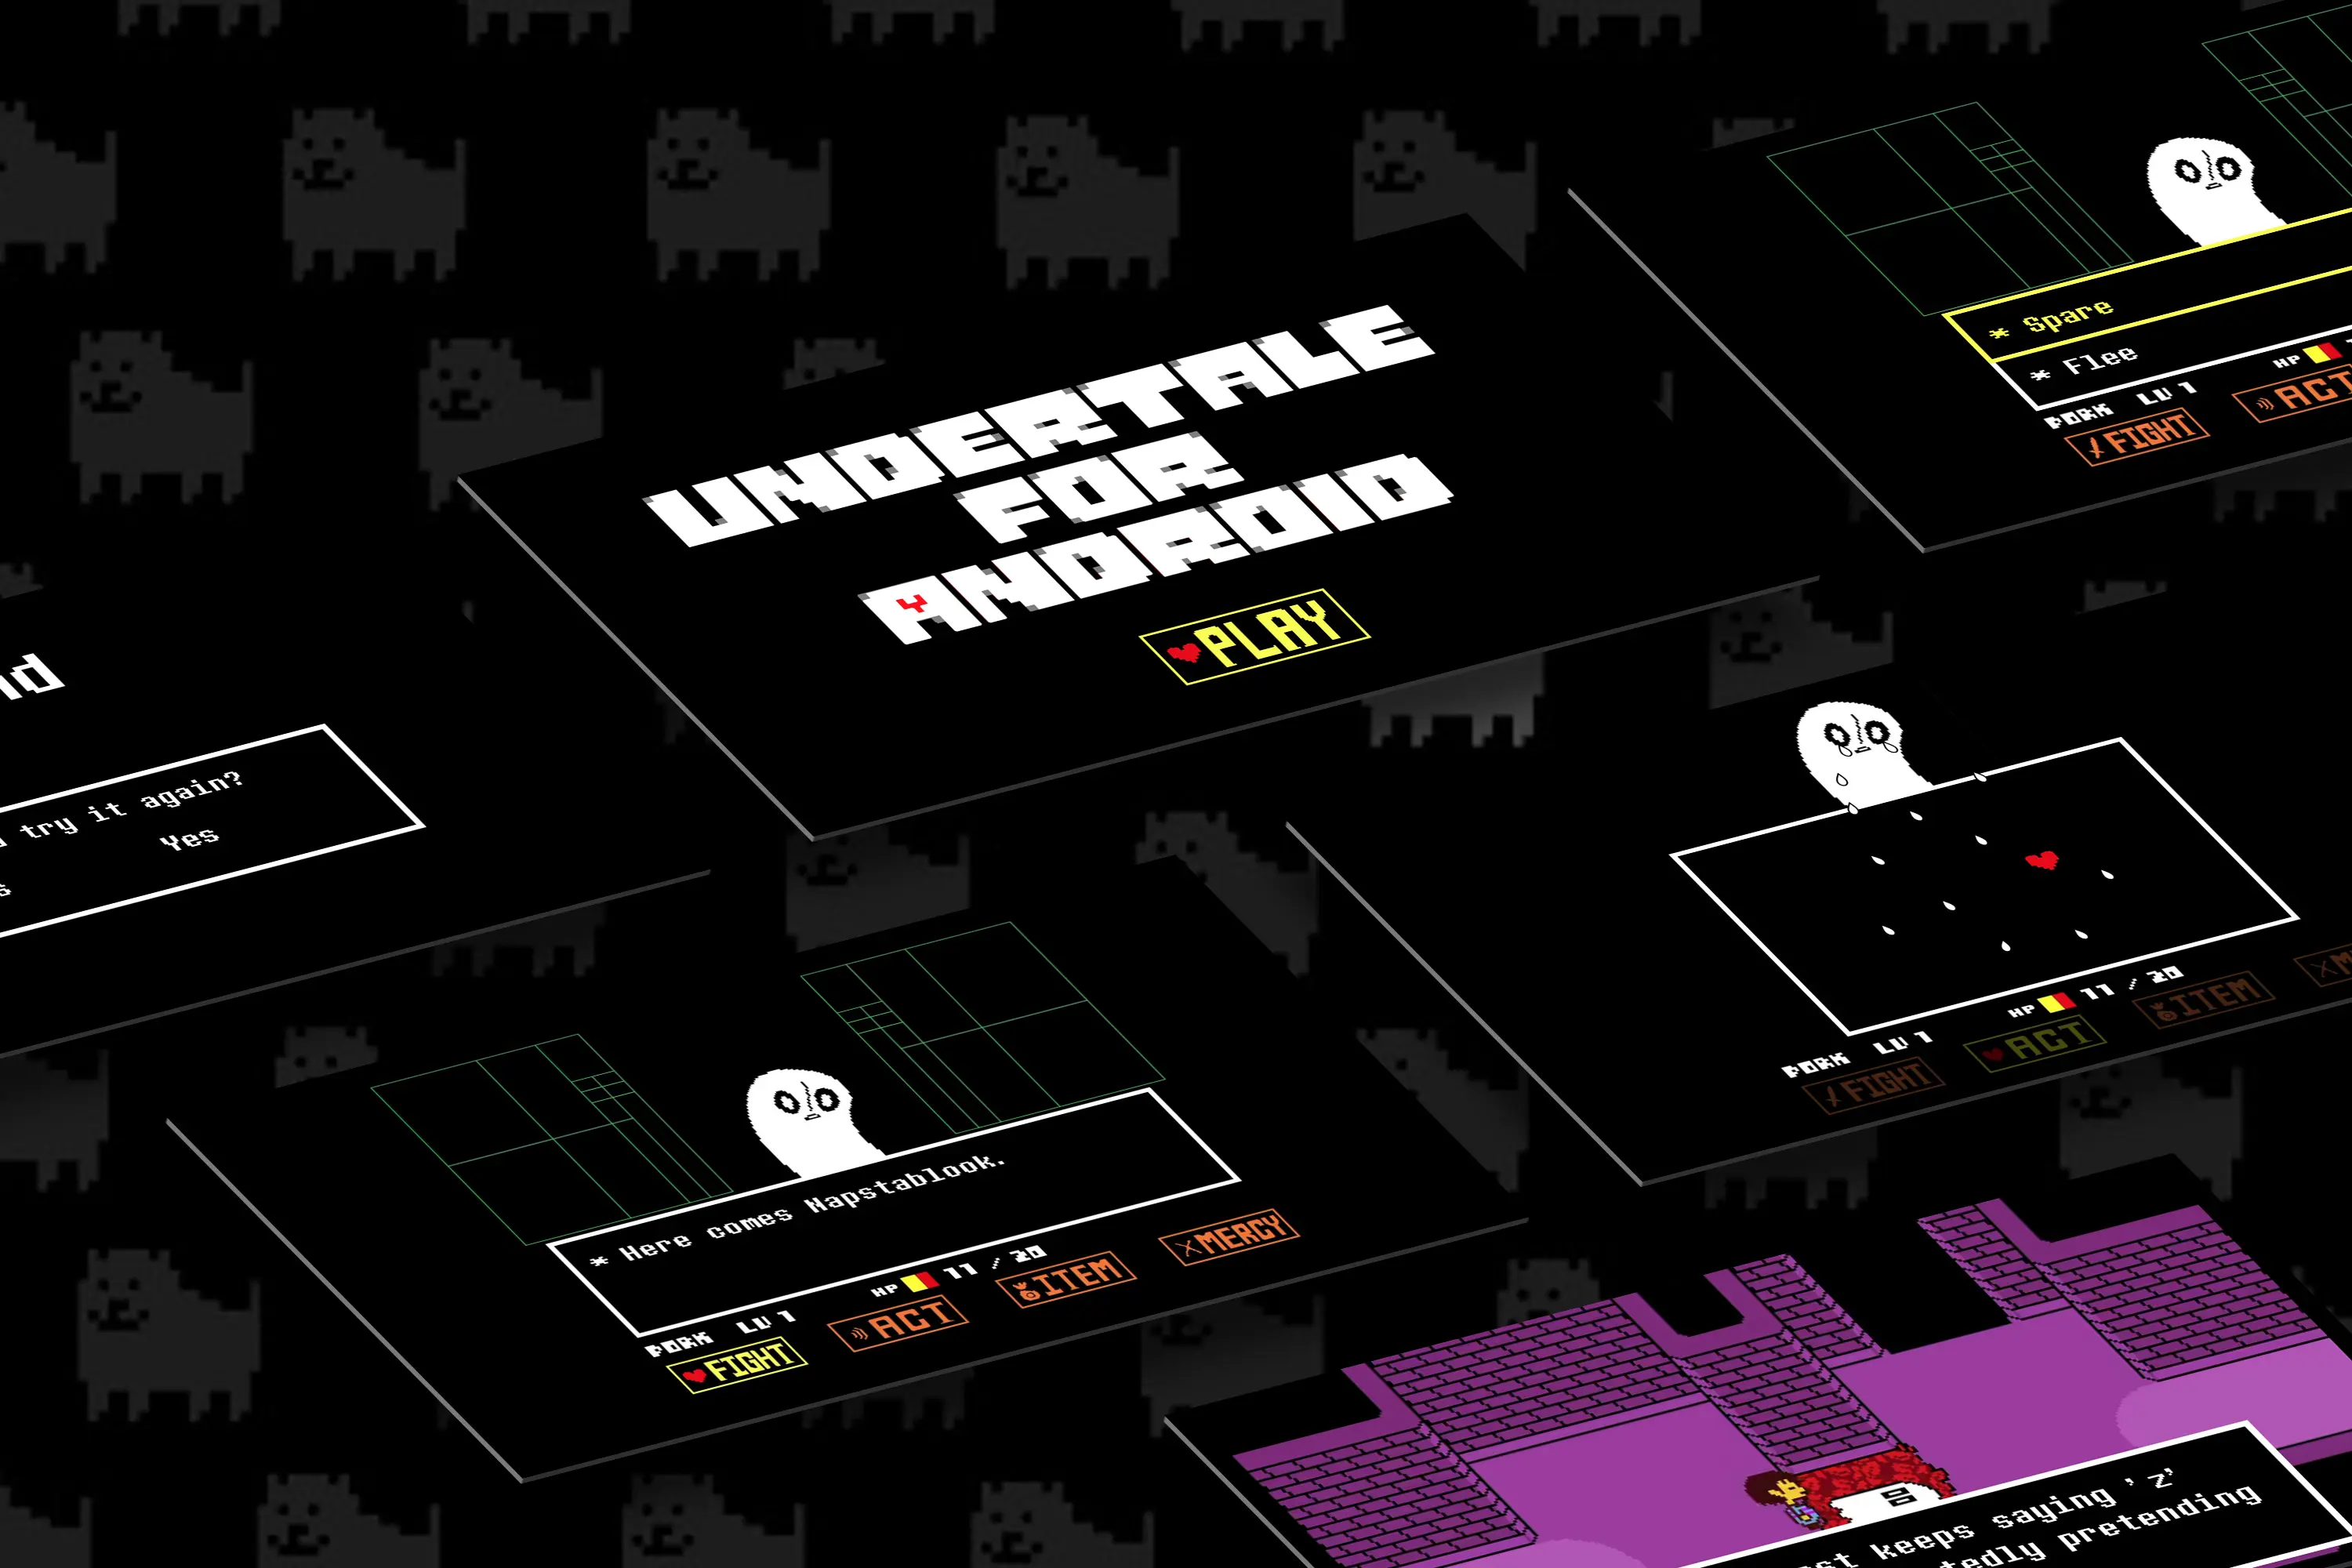 Undertale for Android Mockup